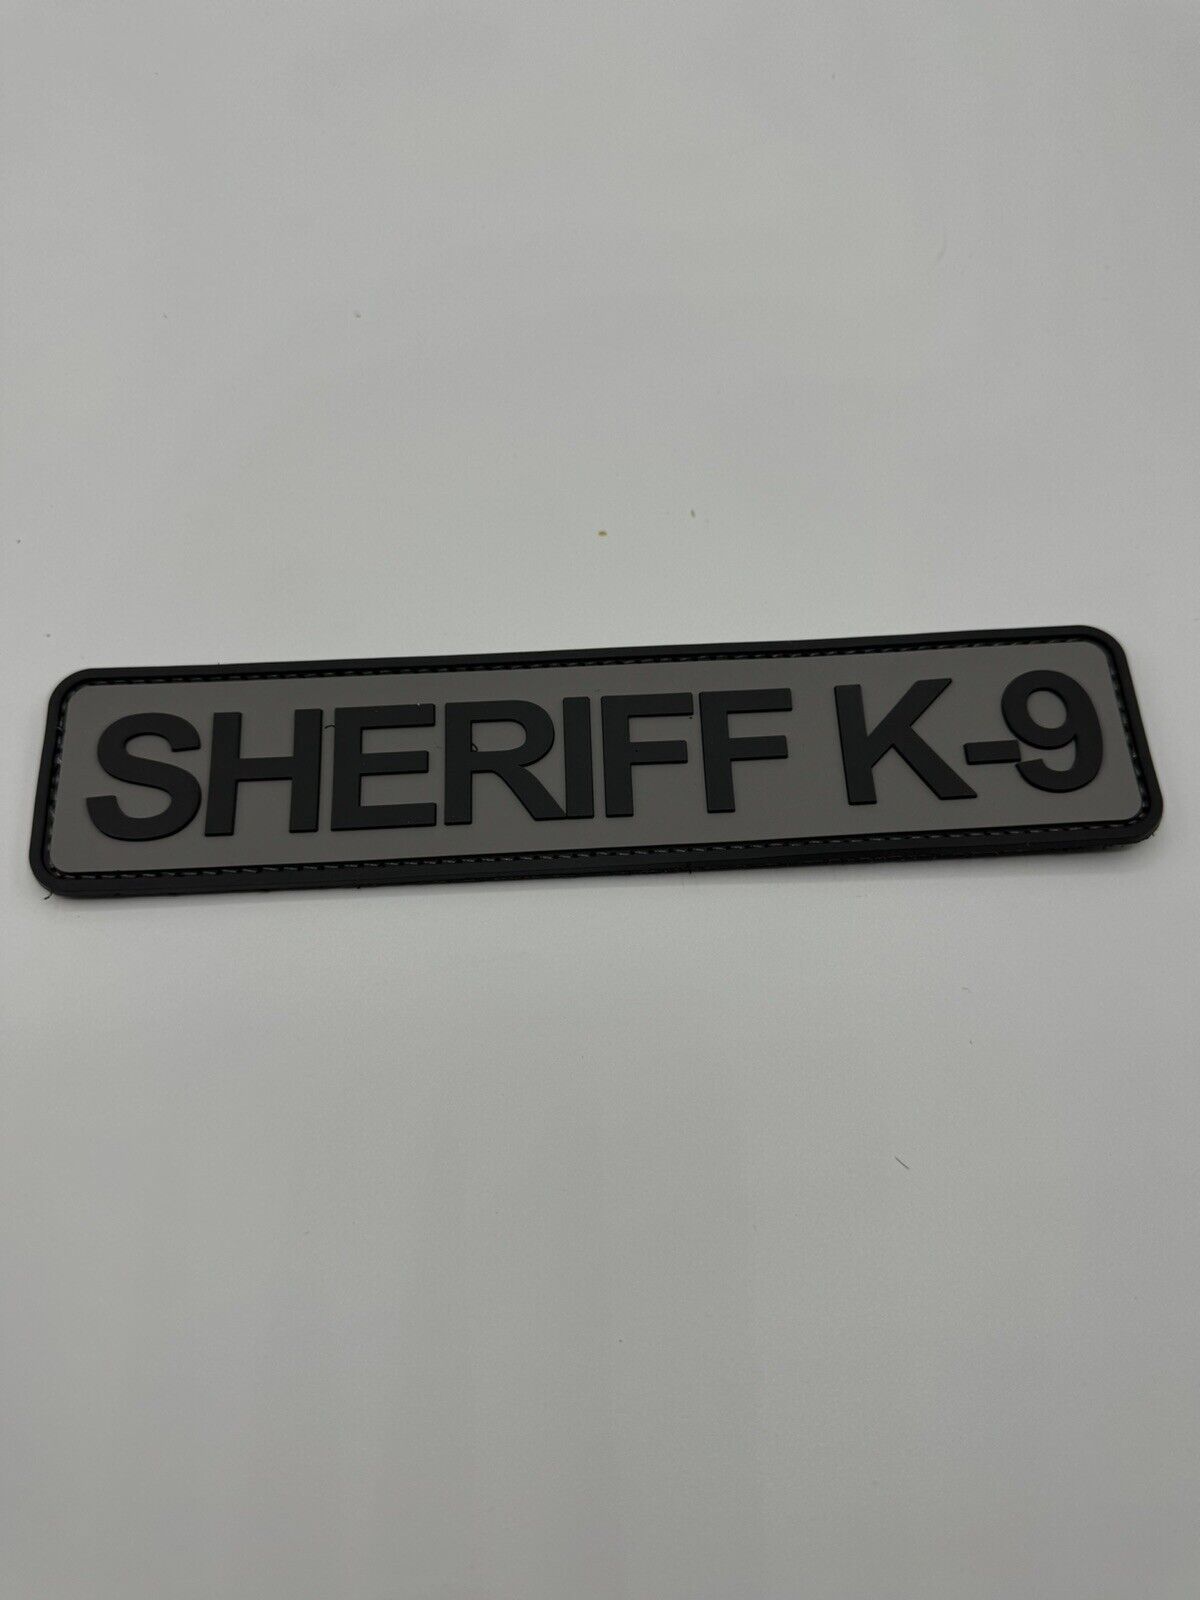 SHERIFF K-9 PATCH LARGE GREY FOR UNIFORMS, BAGS, HARNESS, KENNEL, HOOK BACK